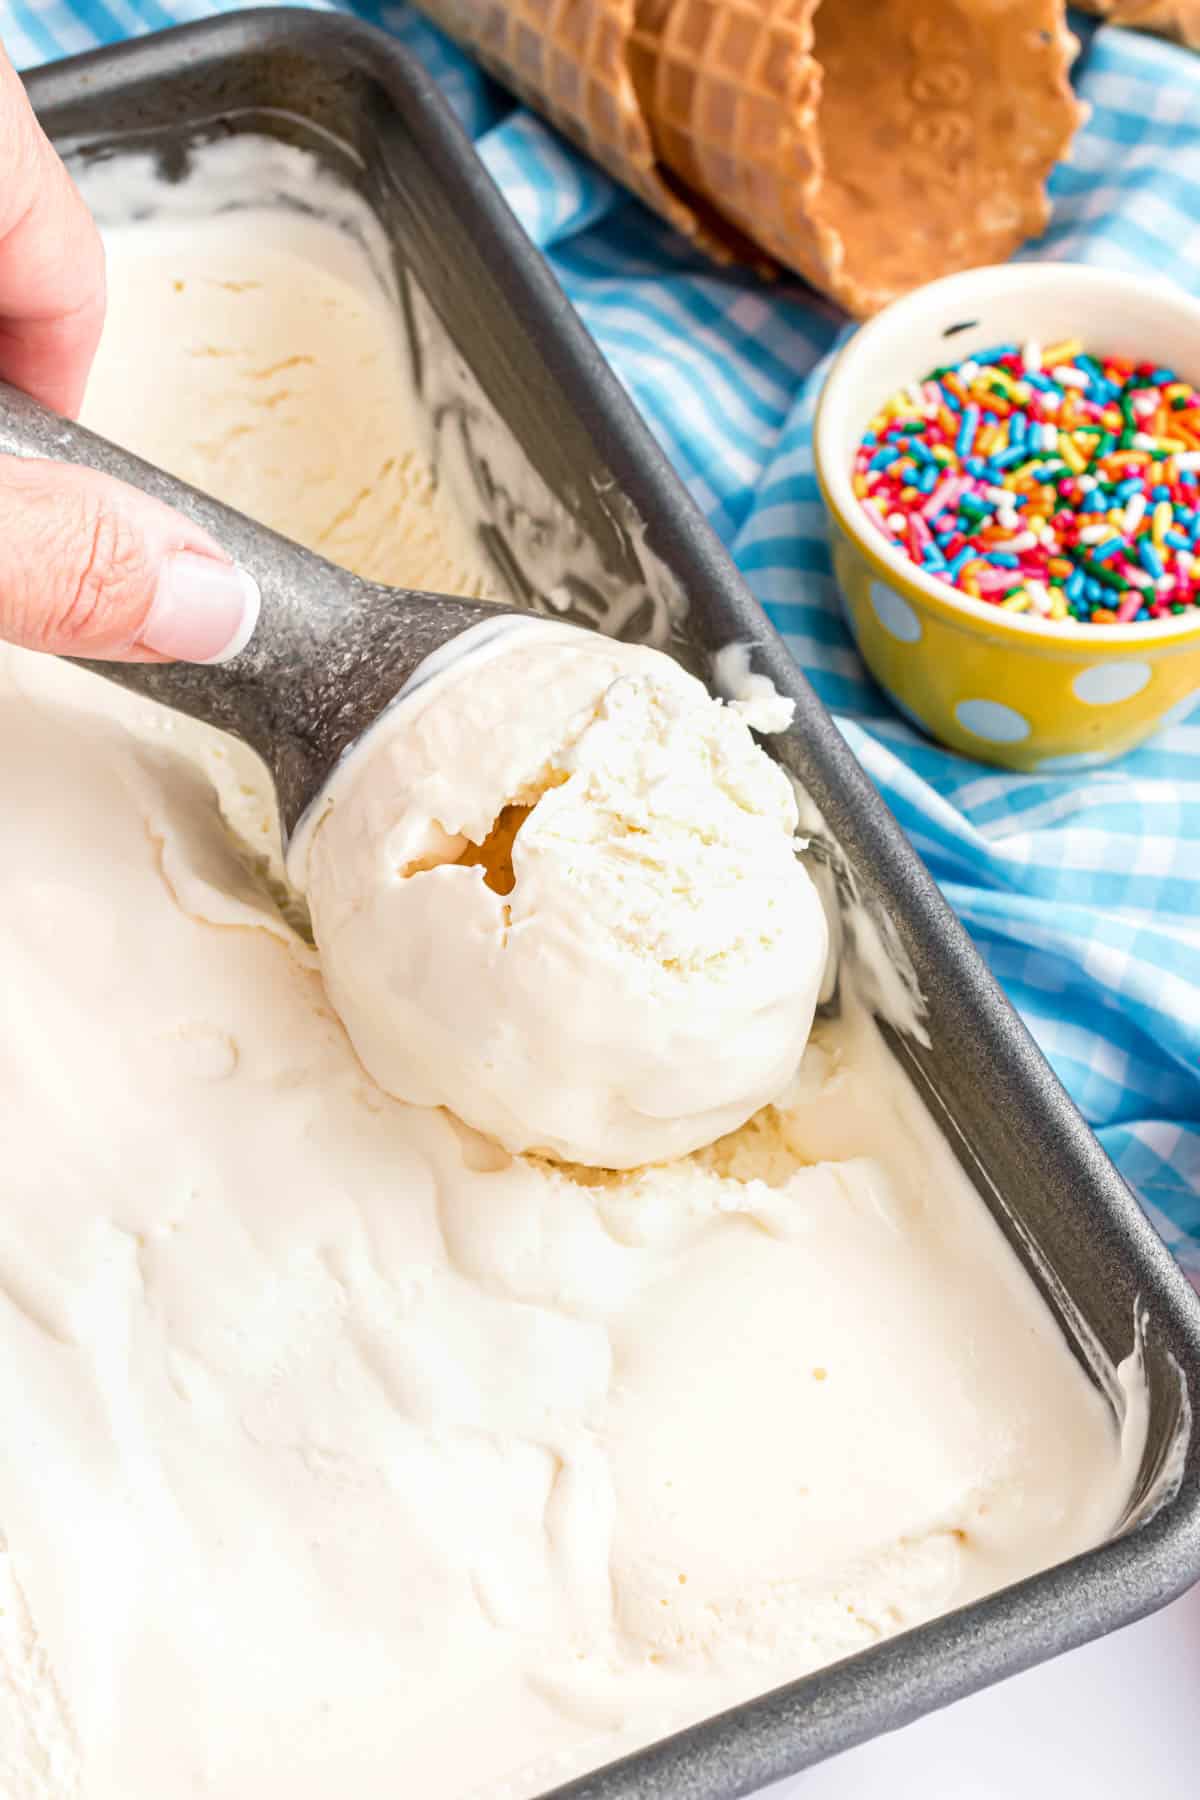 A hand holding an ice cream scooper to scoop vanilla ice cream from a container.